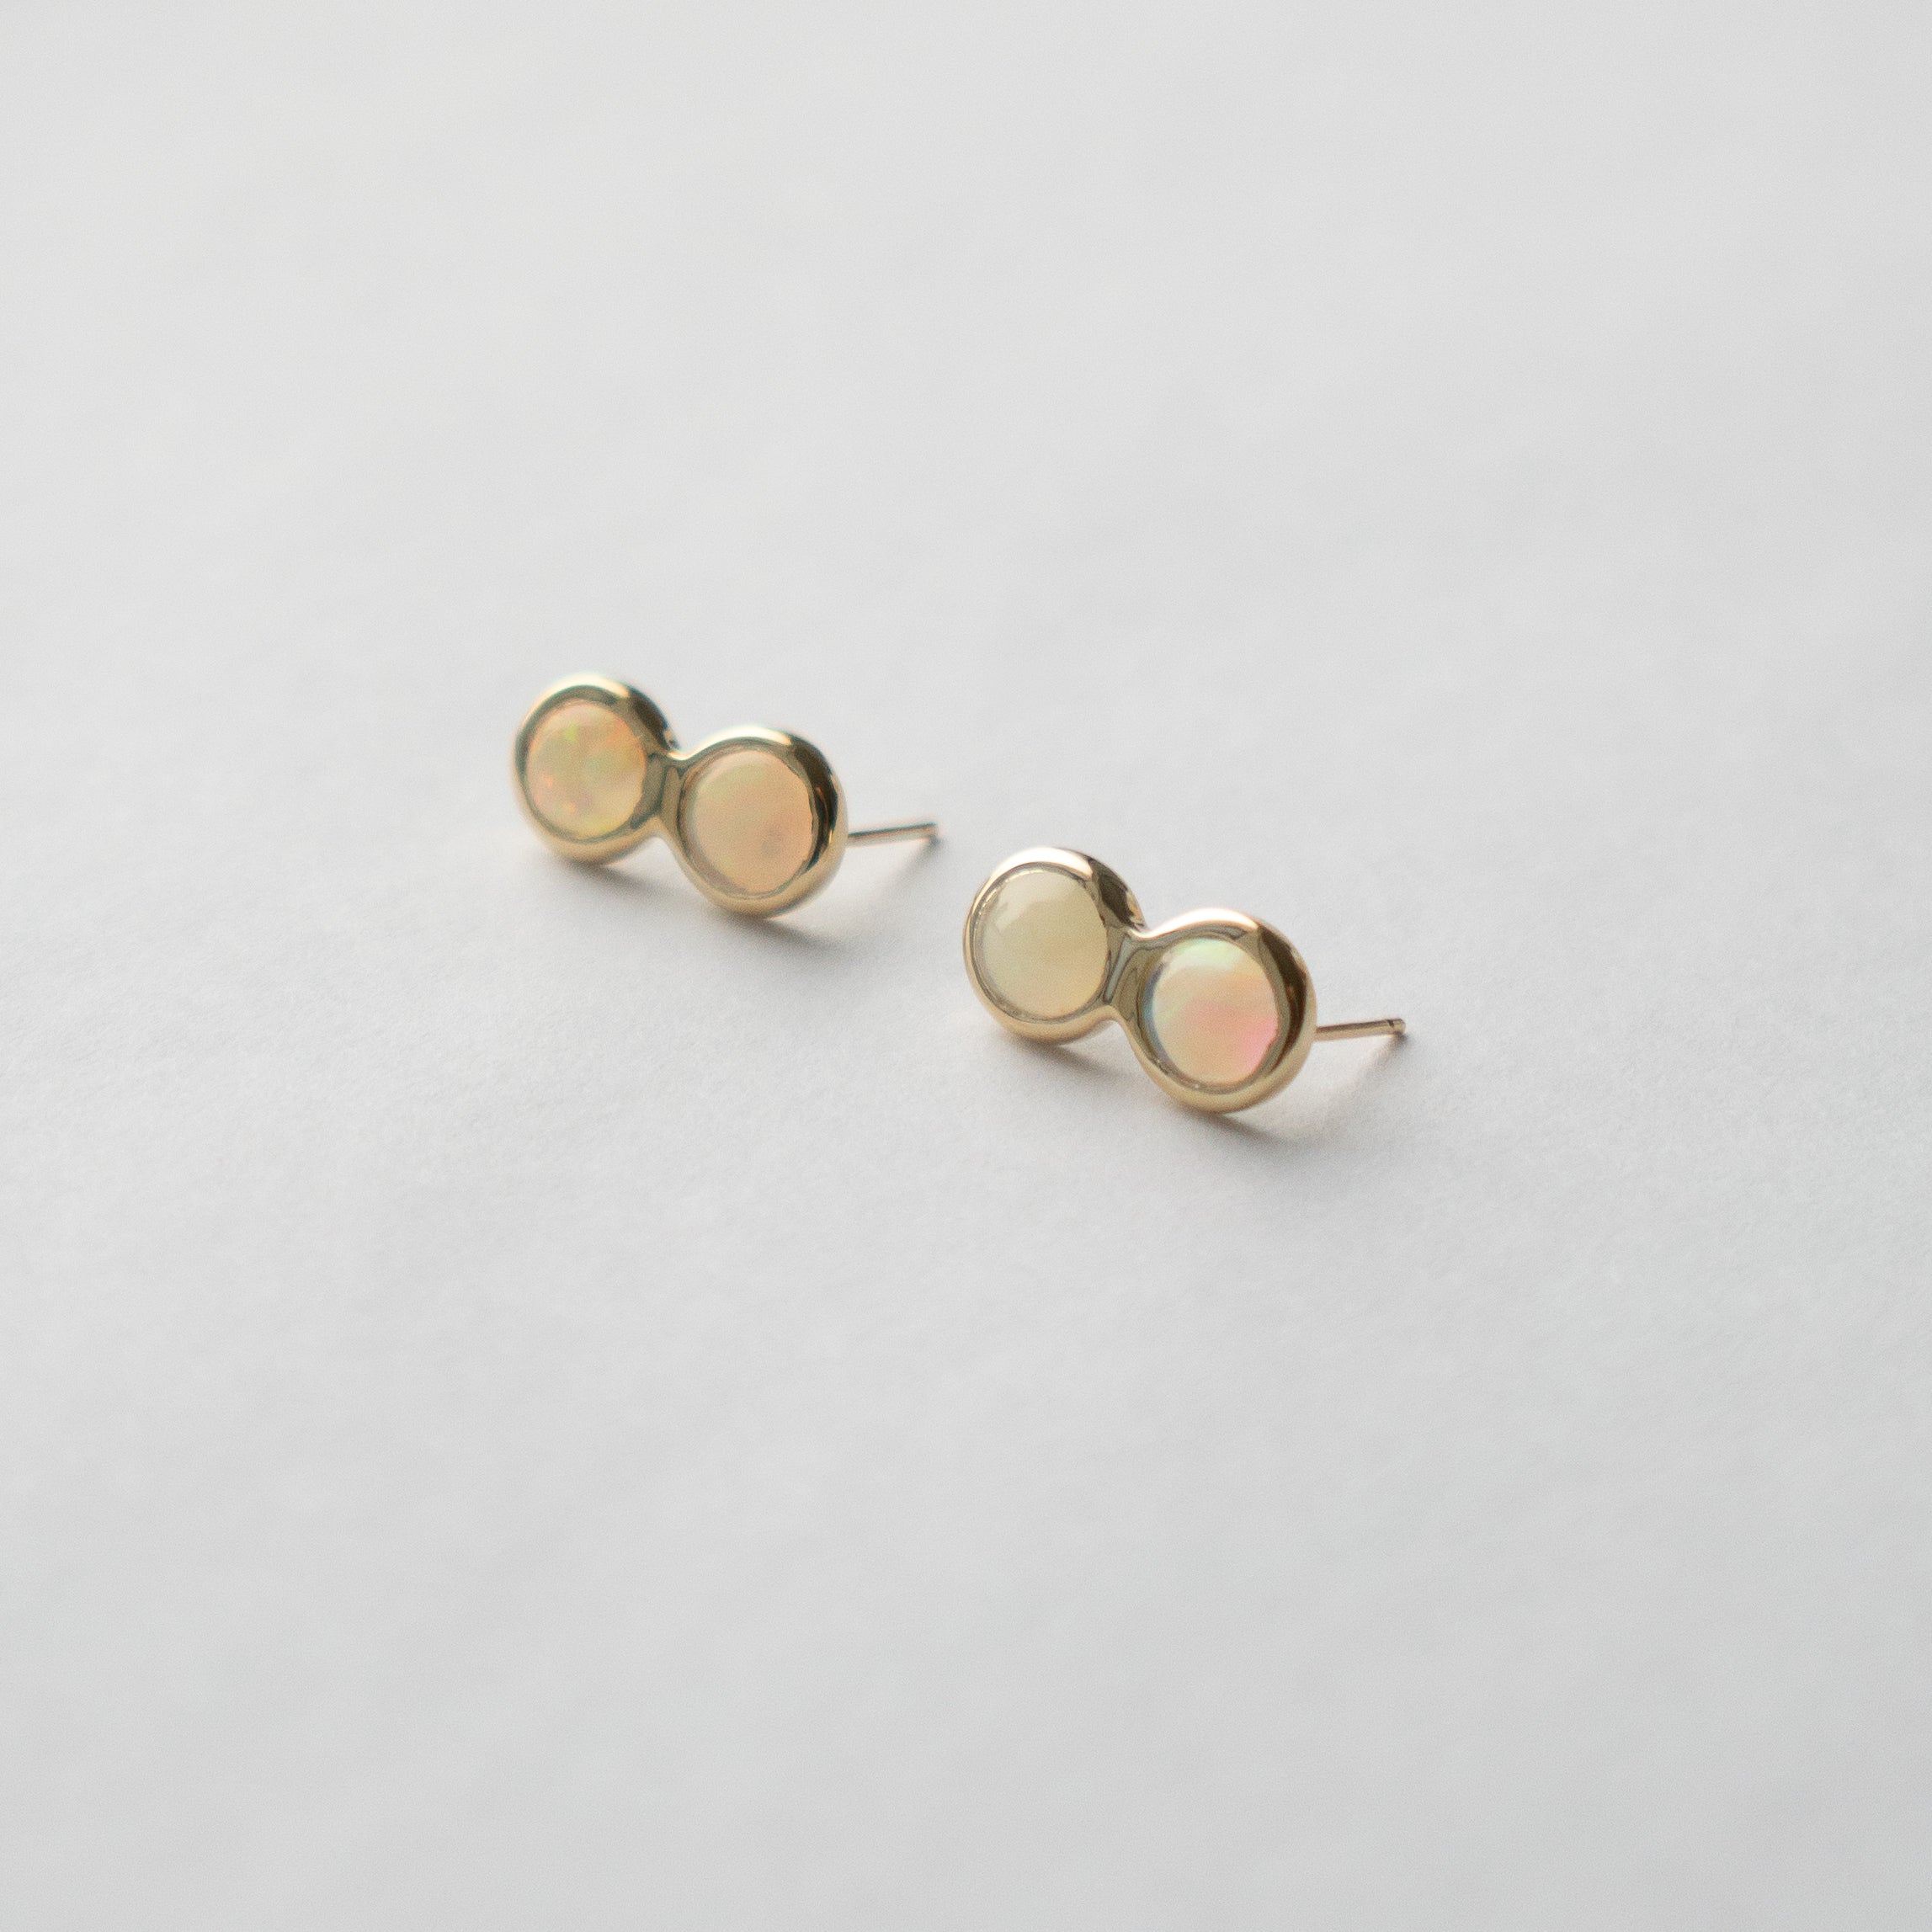 Cool Alia stud earrings in 14 karat yellow gold set with opal gemstone made in NYC by SHW fine Jewelry